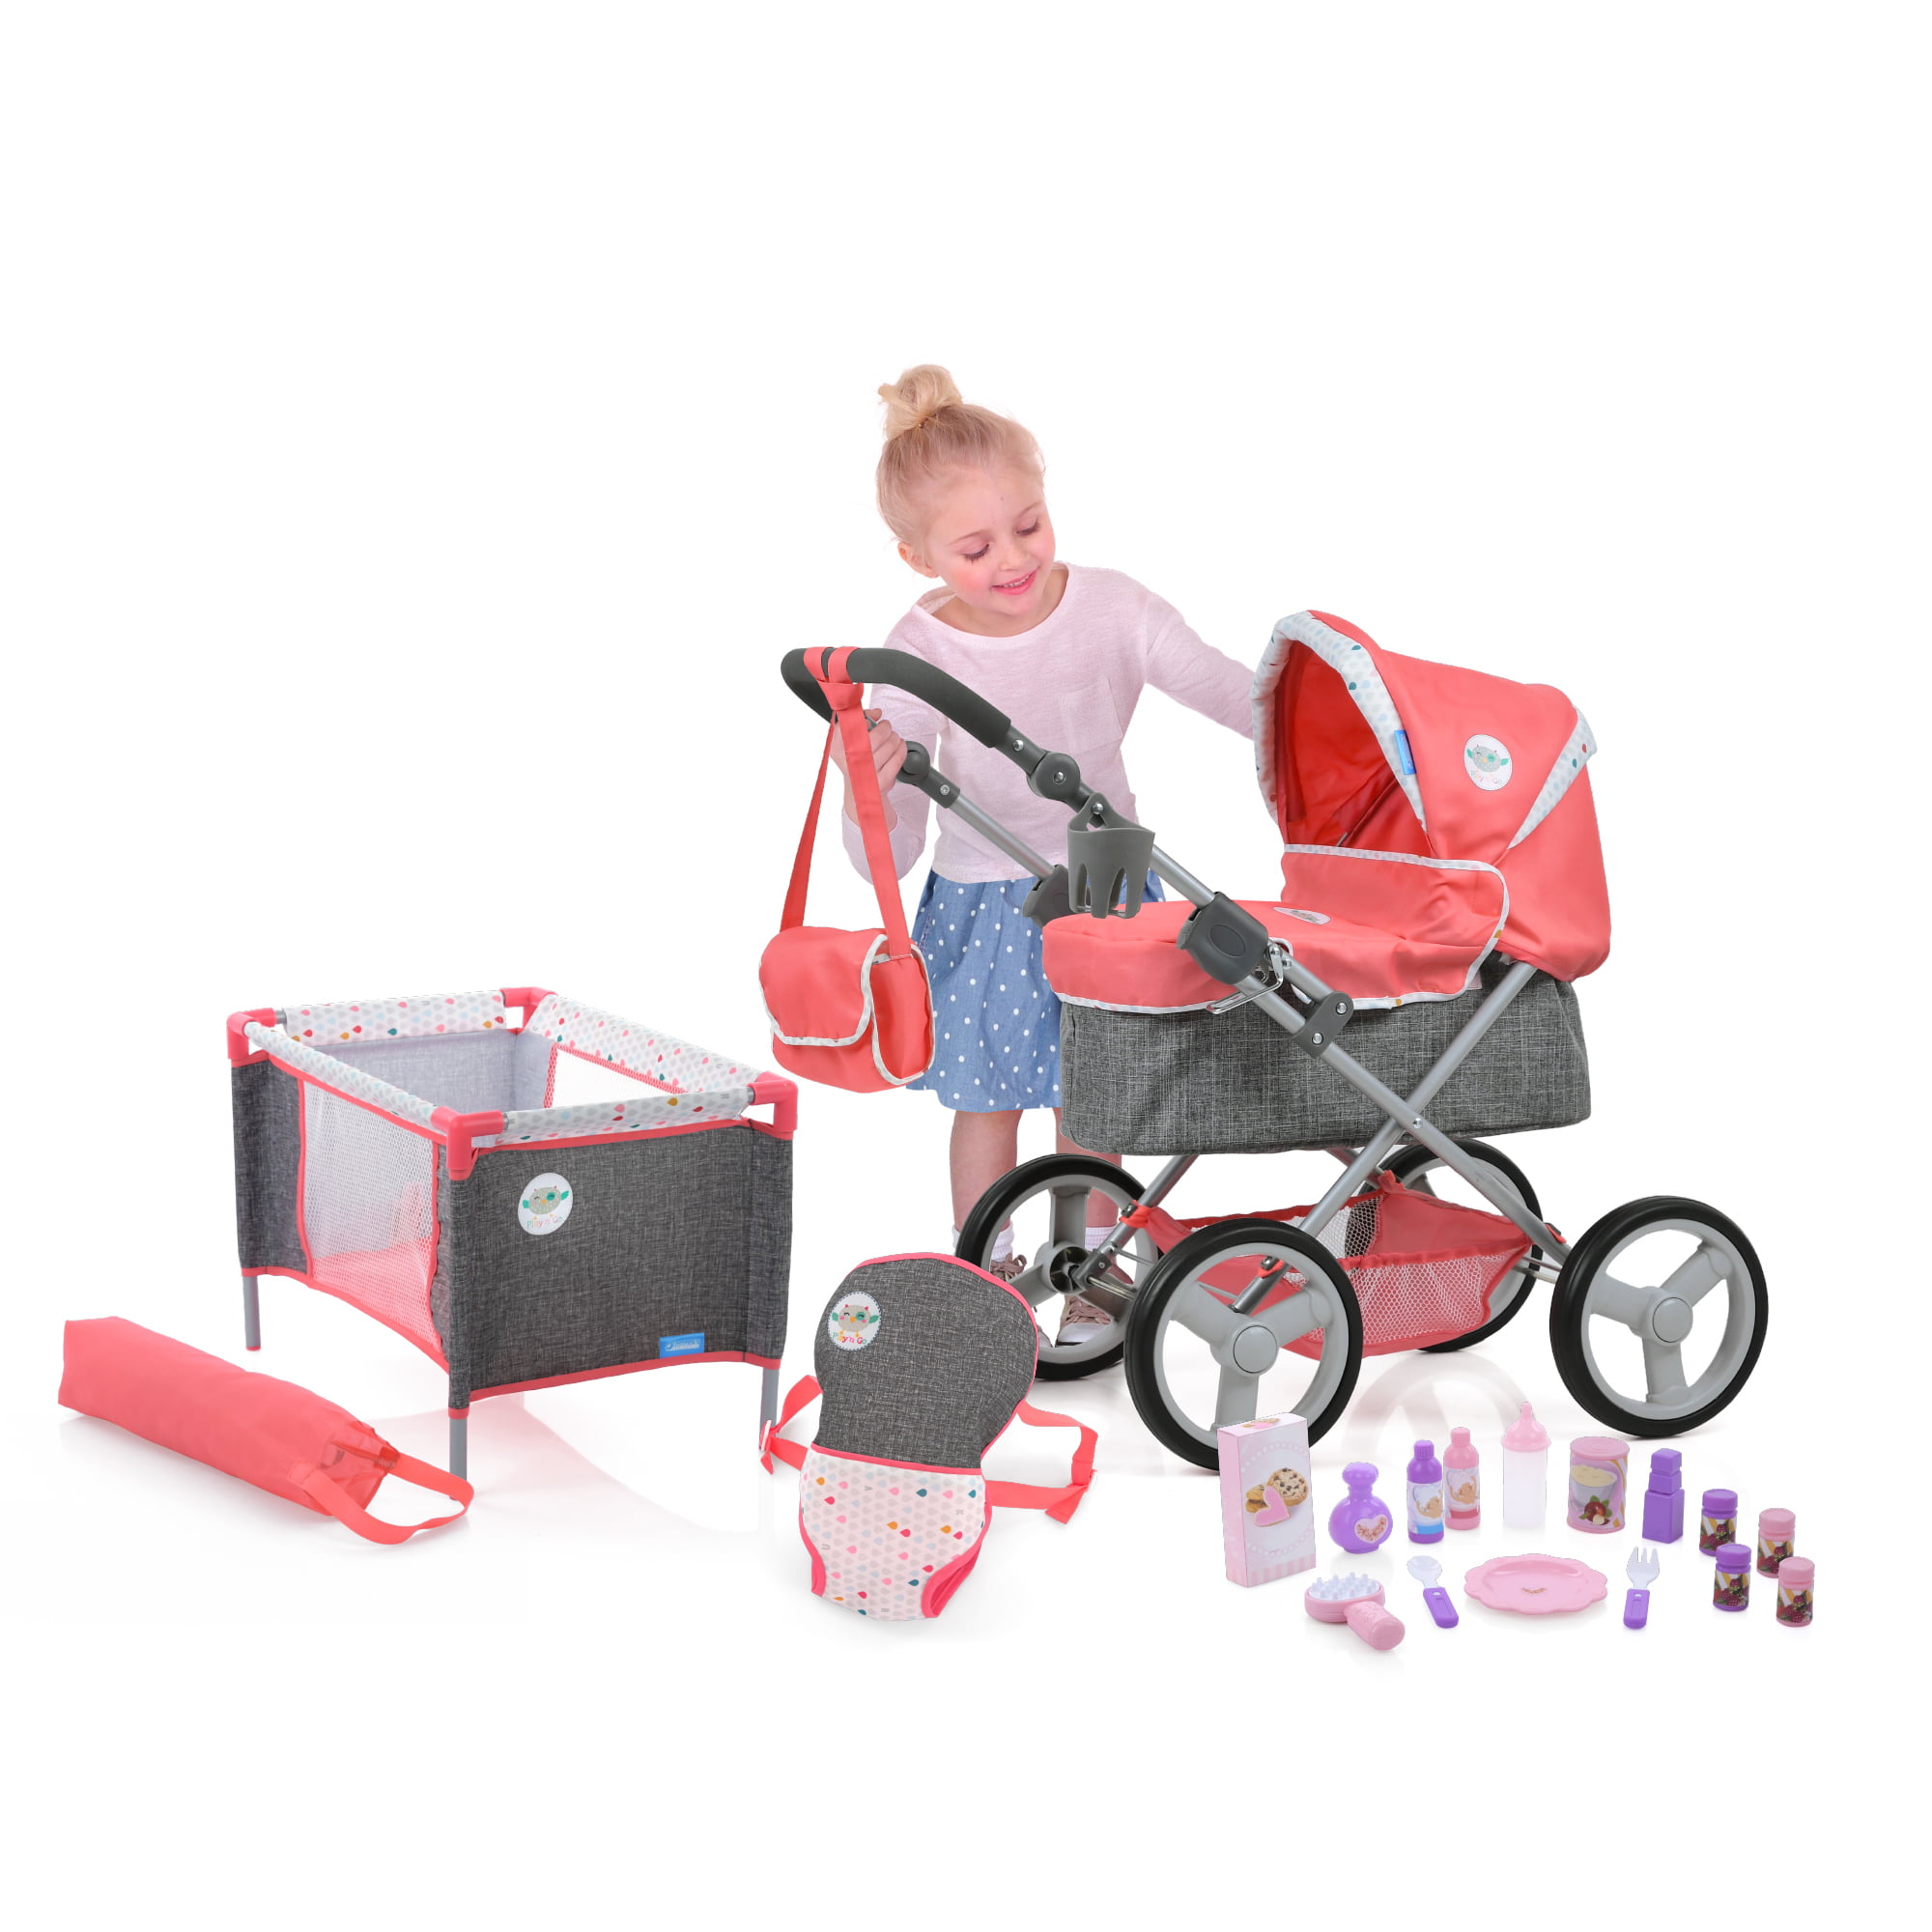 Hauck Play 15 and Play Front Toy Diaper Doll Pram N - Go Carrier Piece Set Yard, Bag